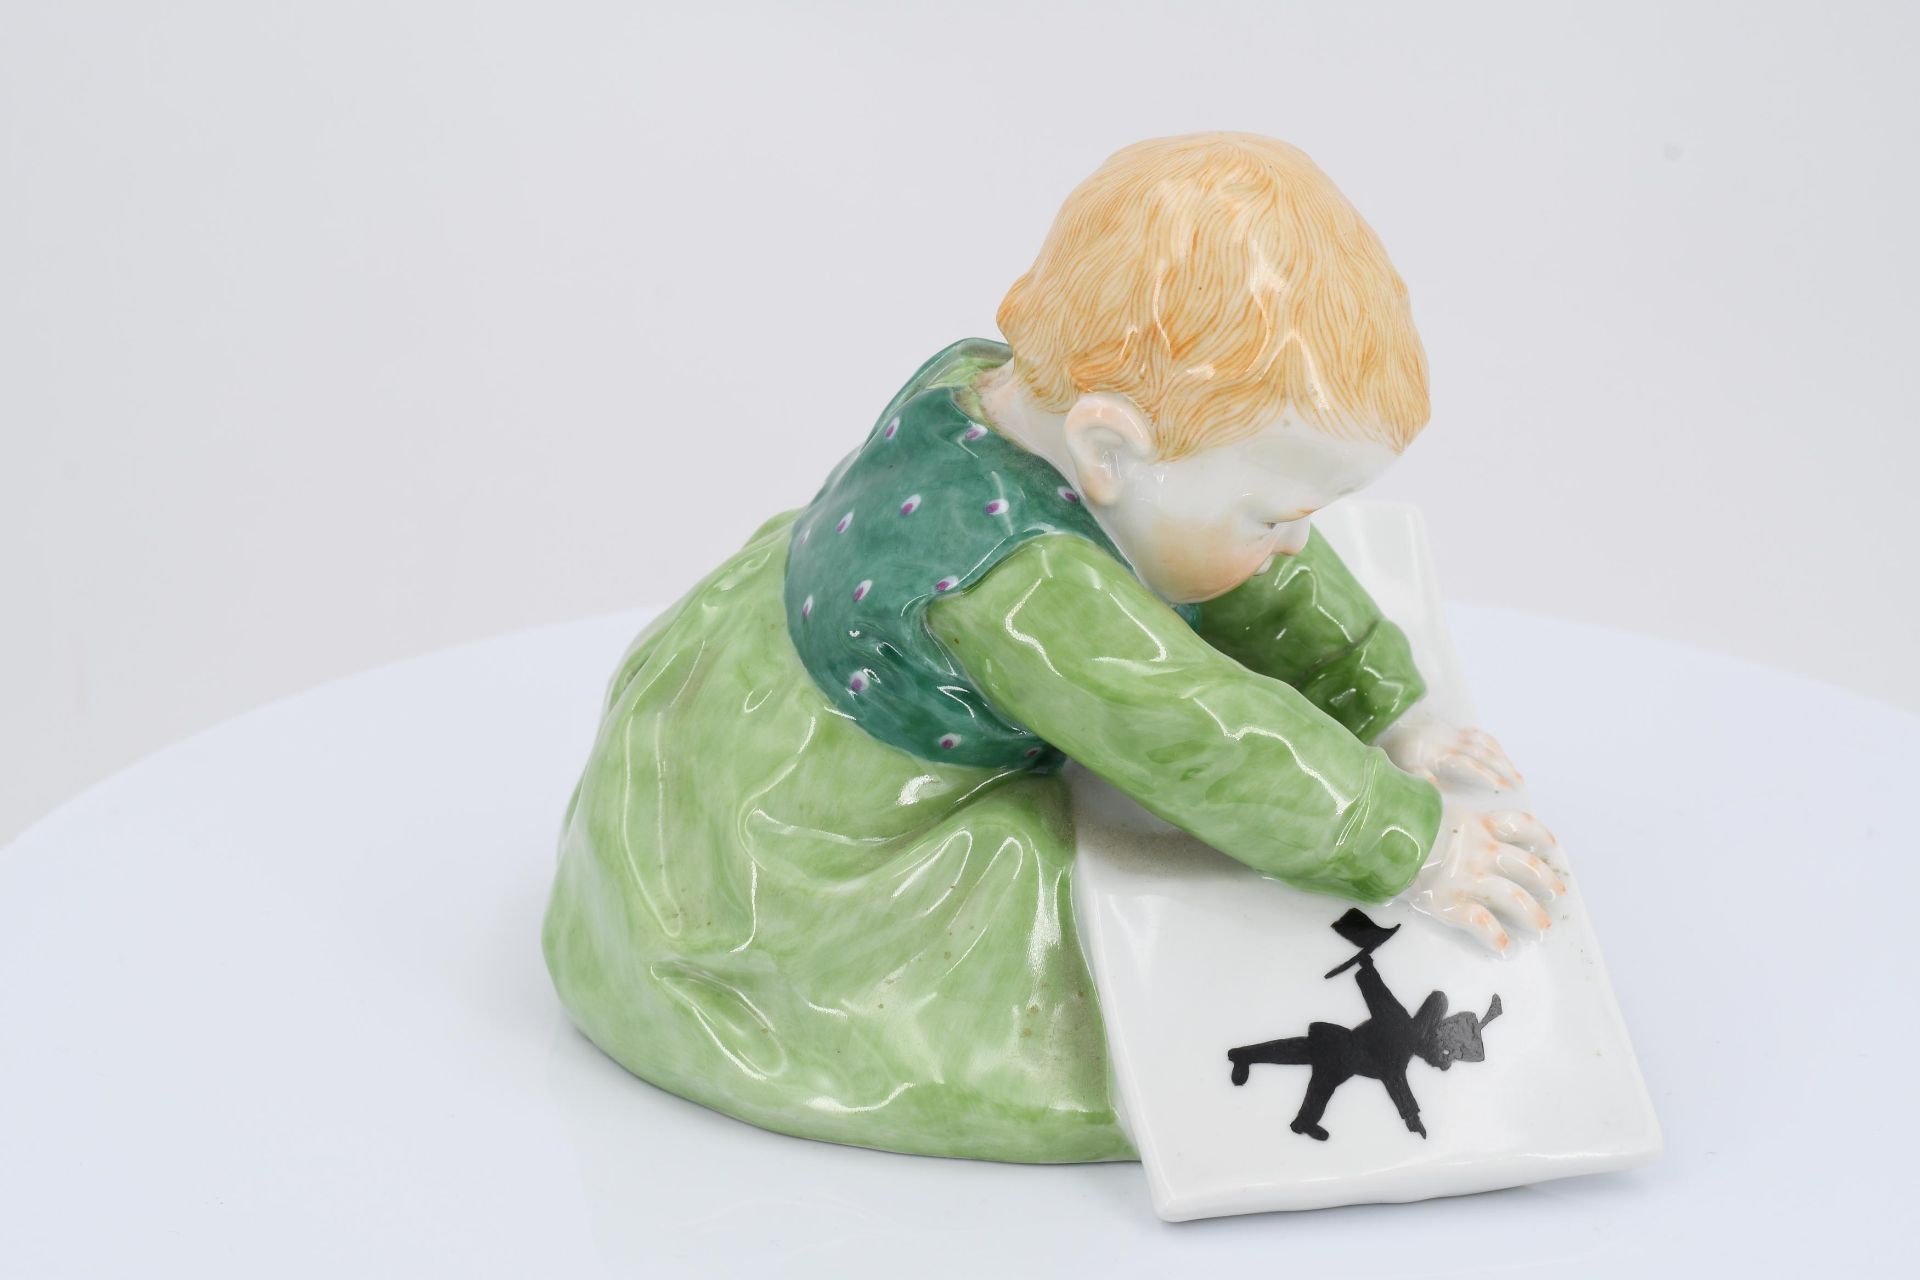 Porcelain figurine of child with storybook - Image 3 of 6